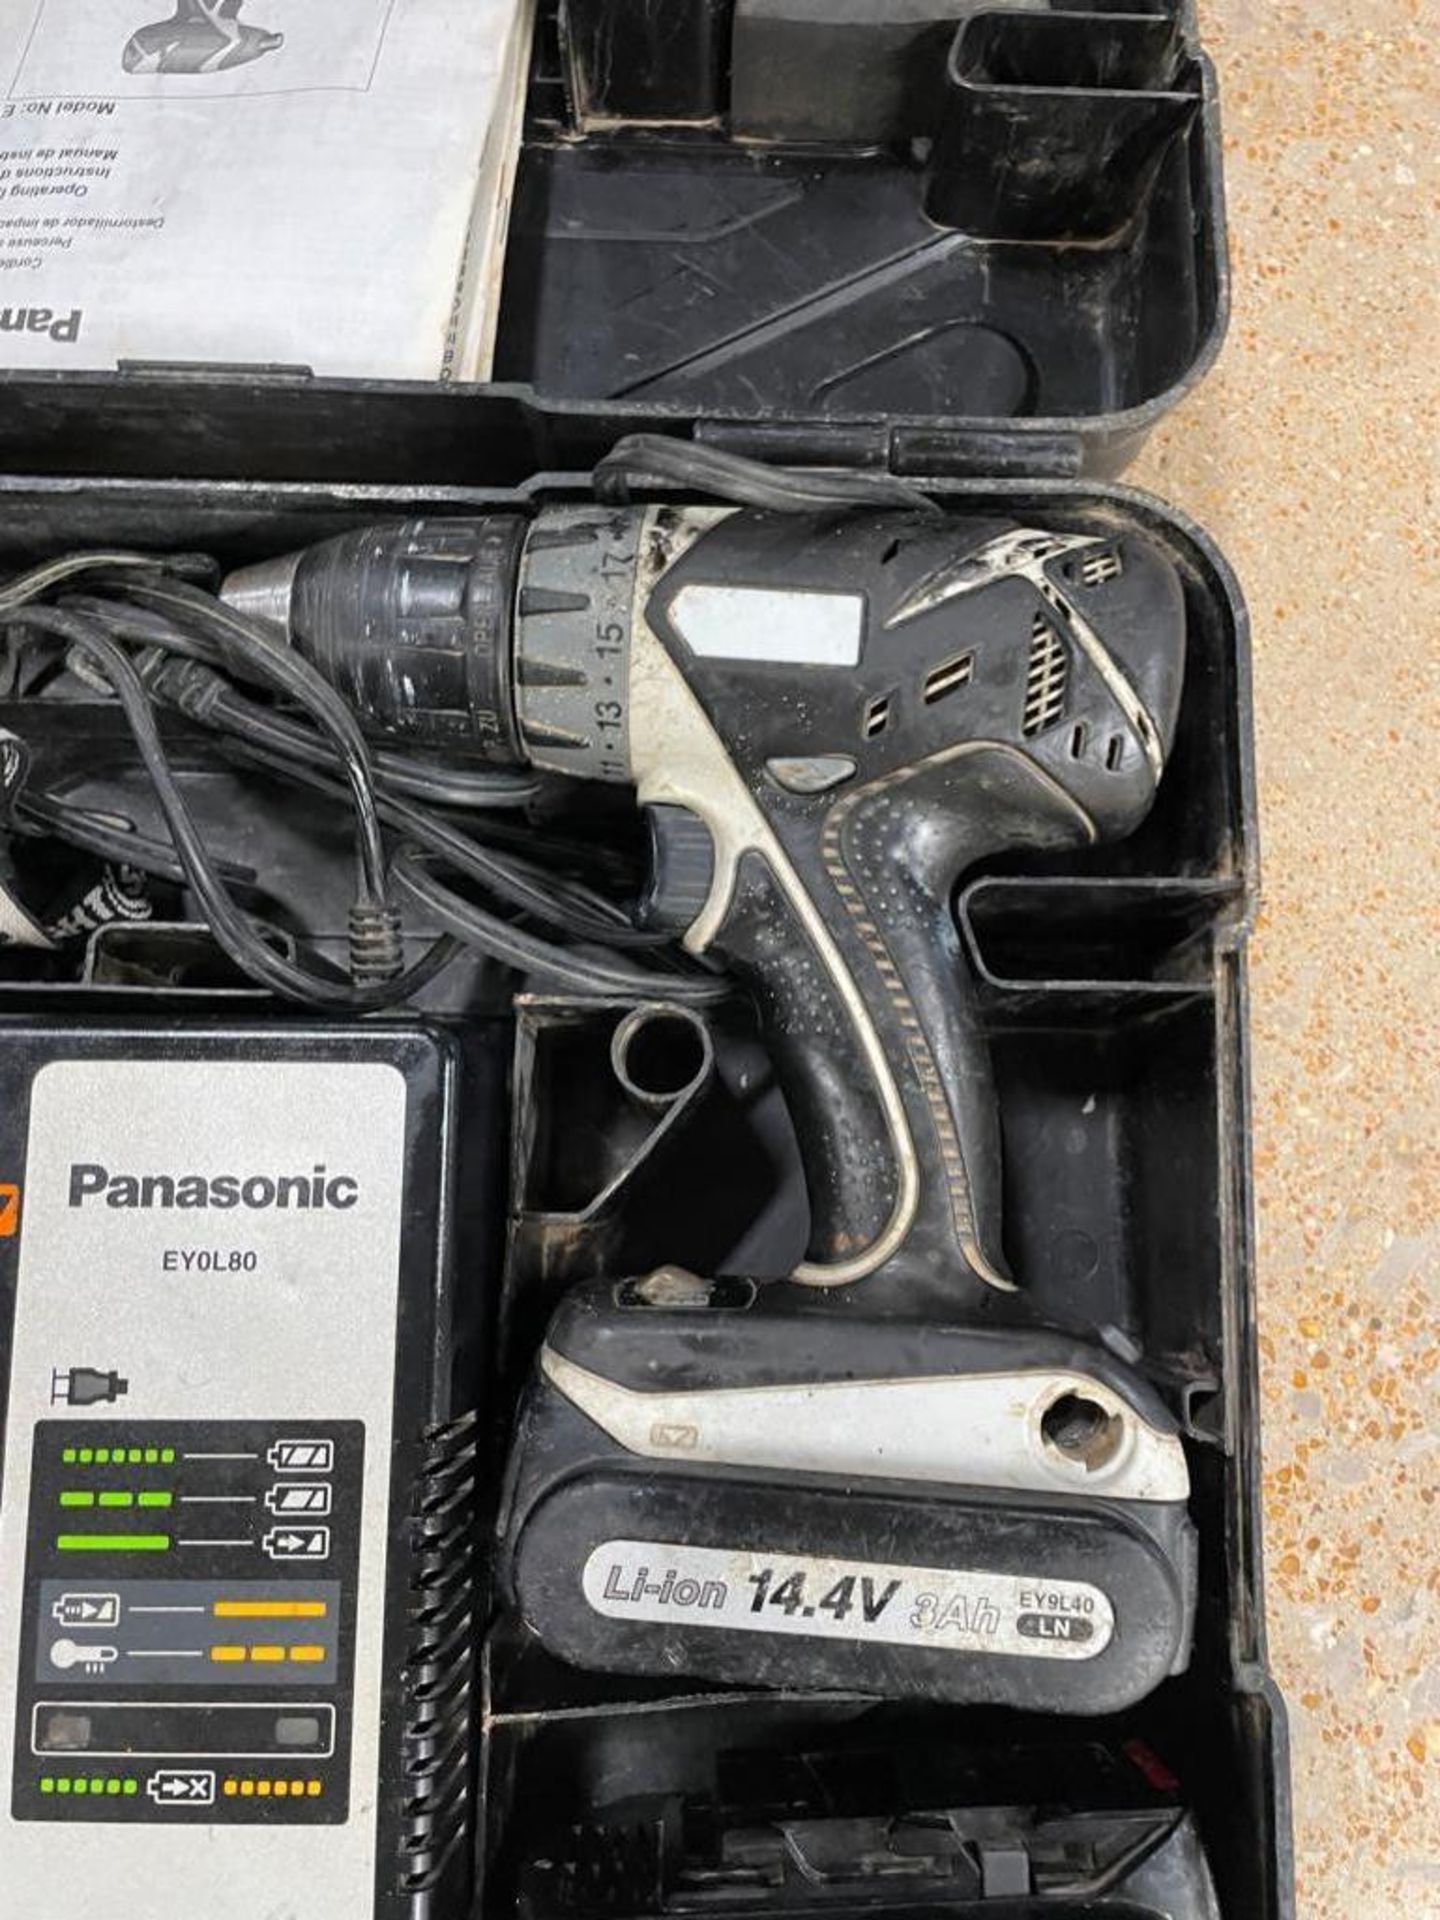 Panasonic Drill & Flashlight in Case with Panasonic Ey0L80 Charger & Li-ion 14.4V Batteries. Located - Image 2 of 5